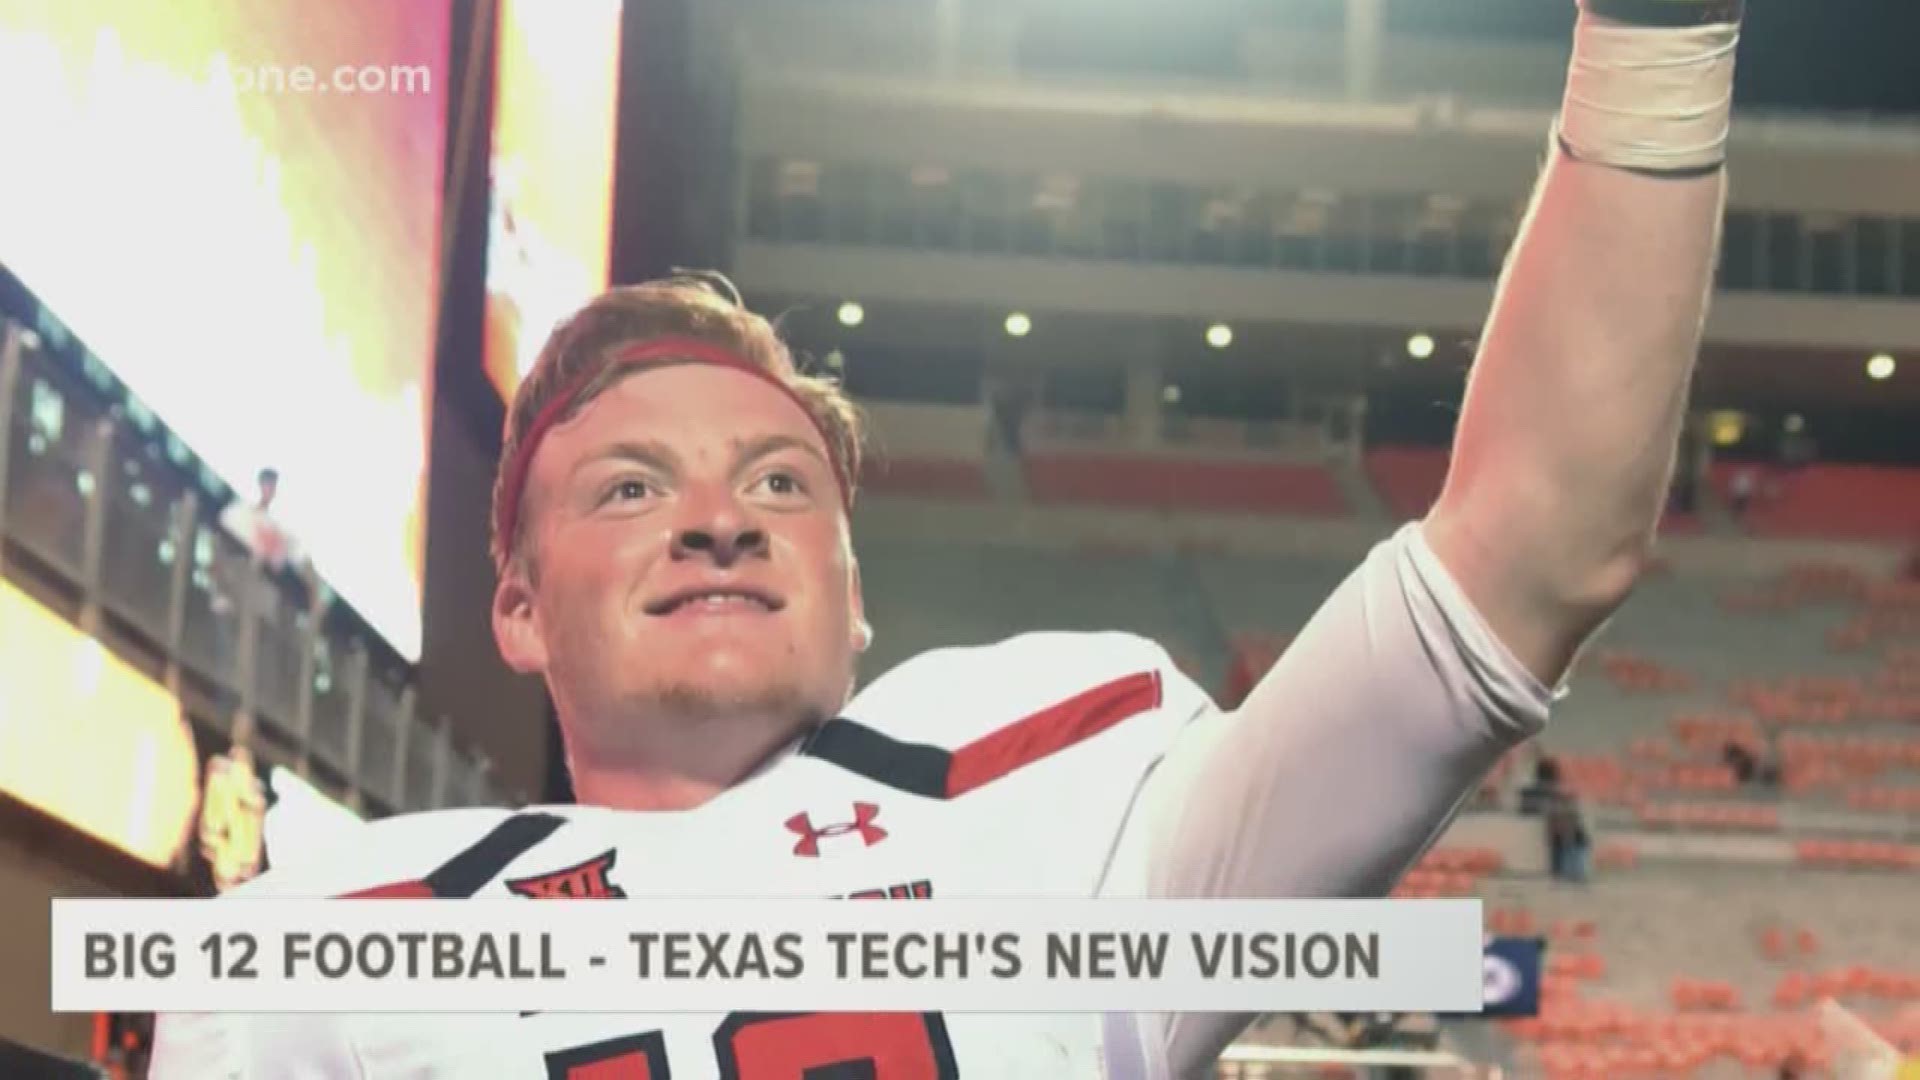 The Red Raiders have a new football coach and a new vision to show off in the Big 12 conference